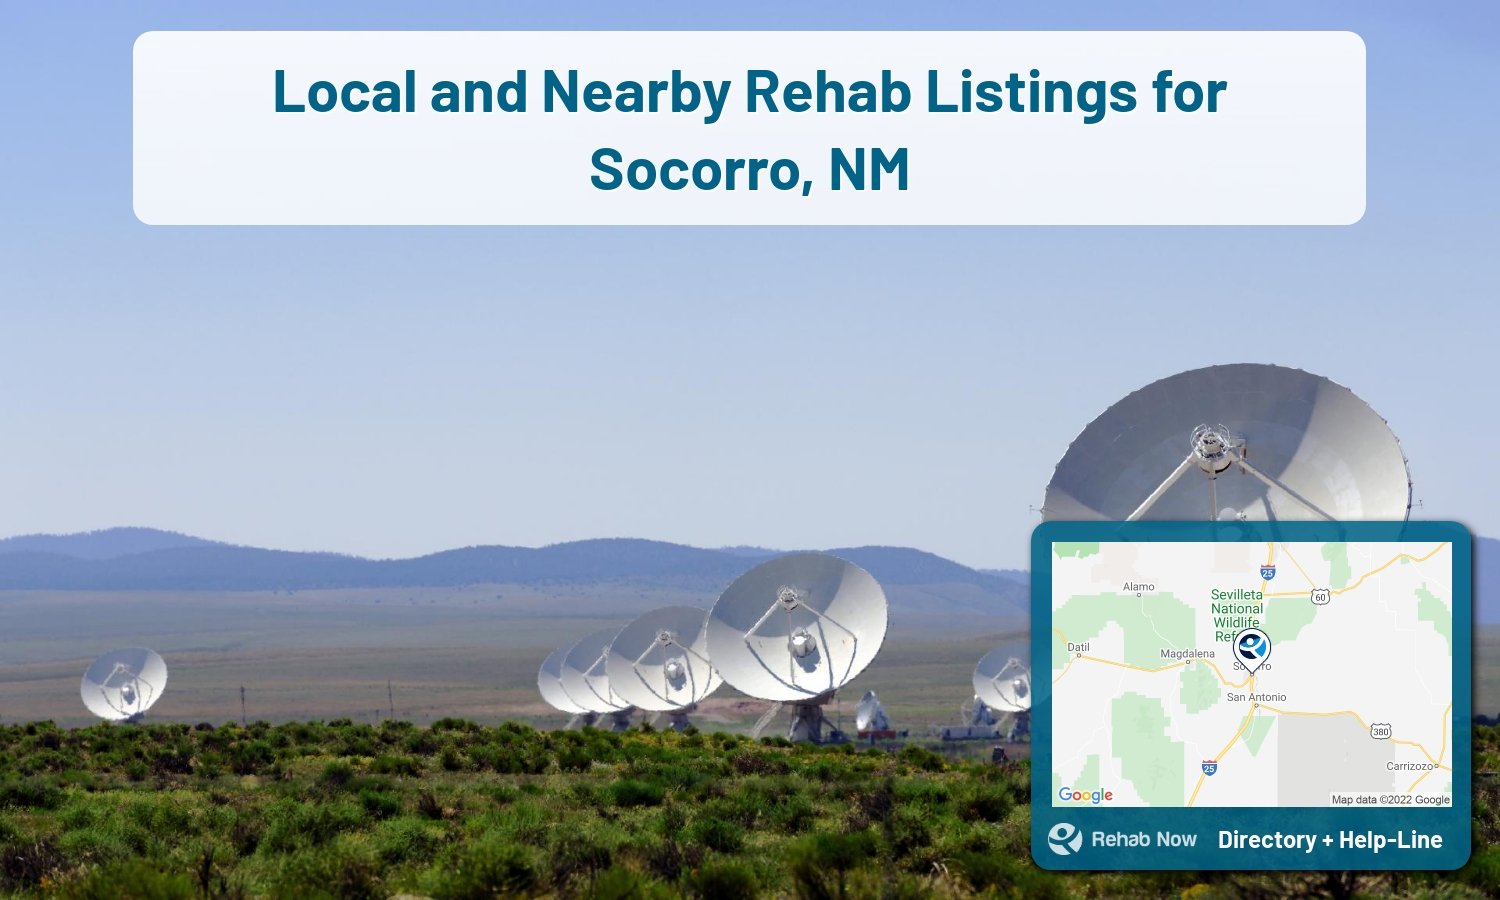 List of alcohol and drug treatment centers near you in Socorro, New Mexico. Research certifications, programs, methods, pricing, and more.